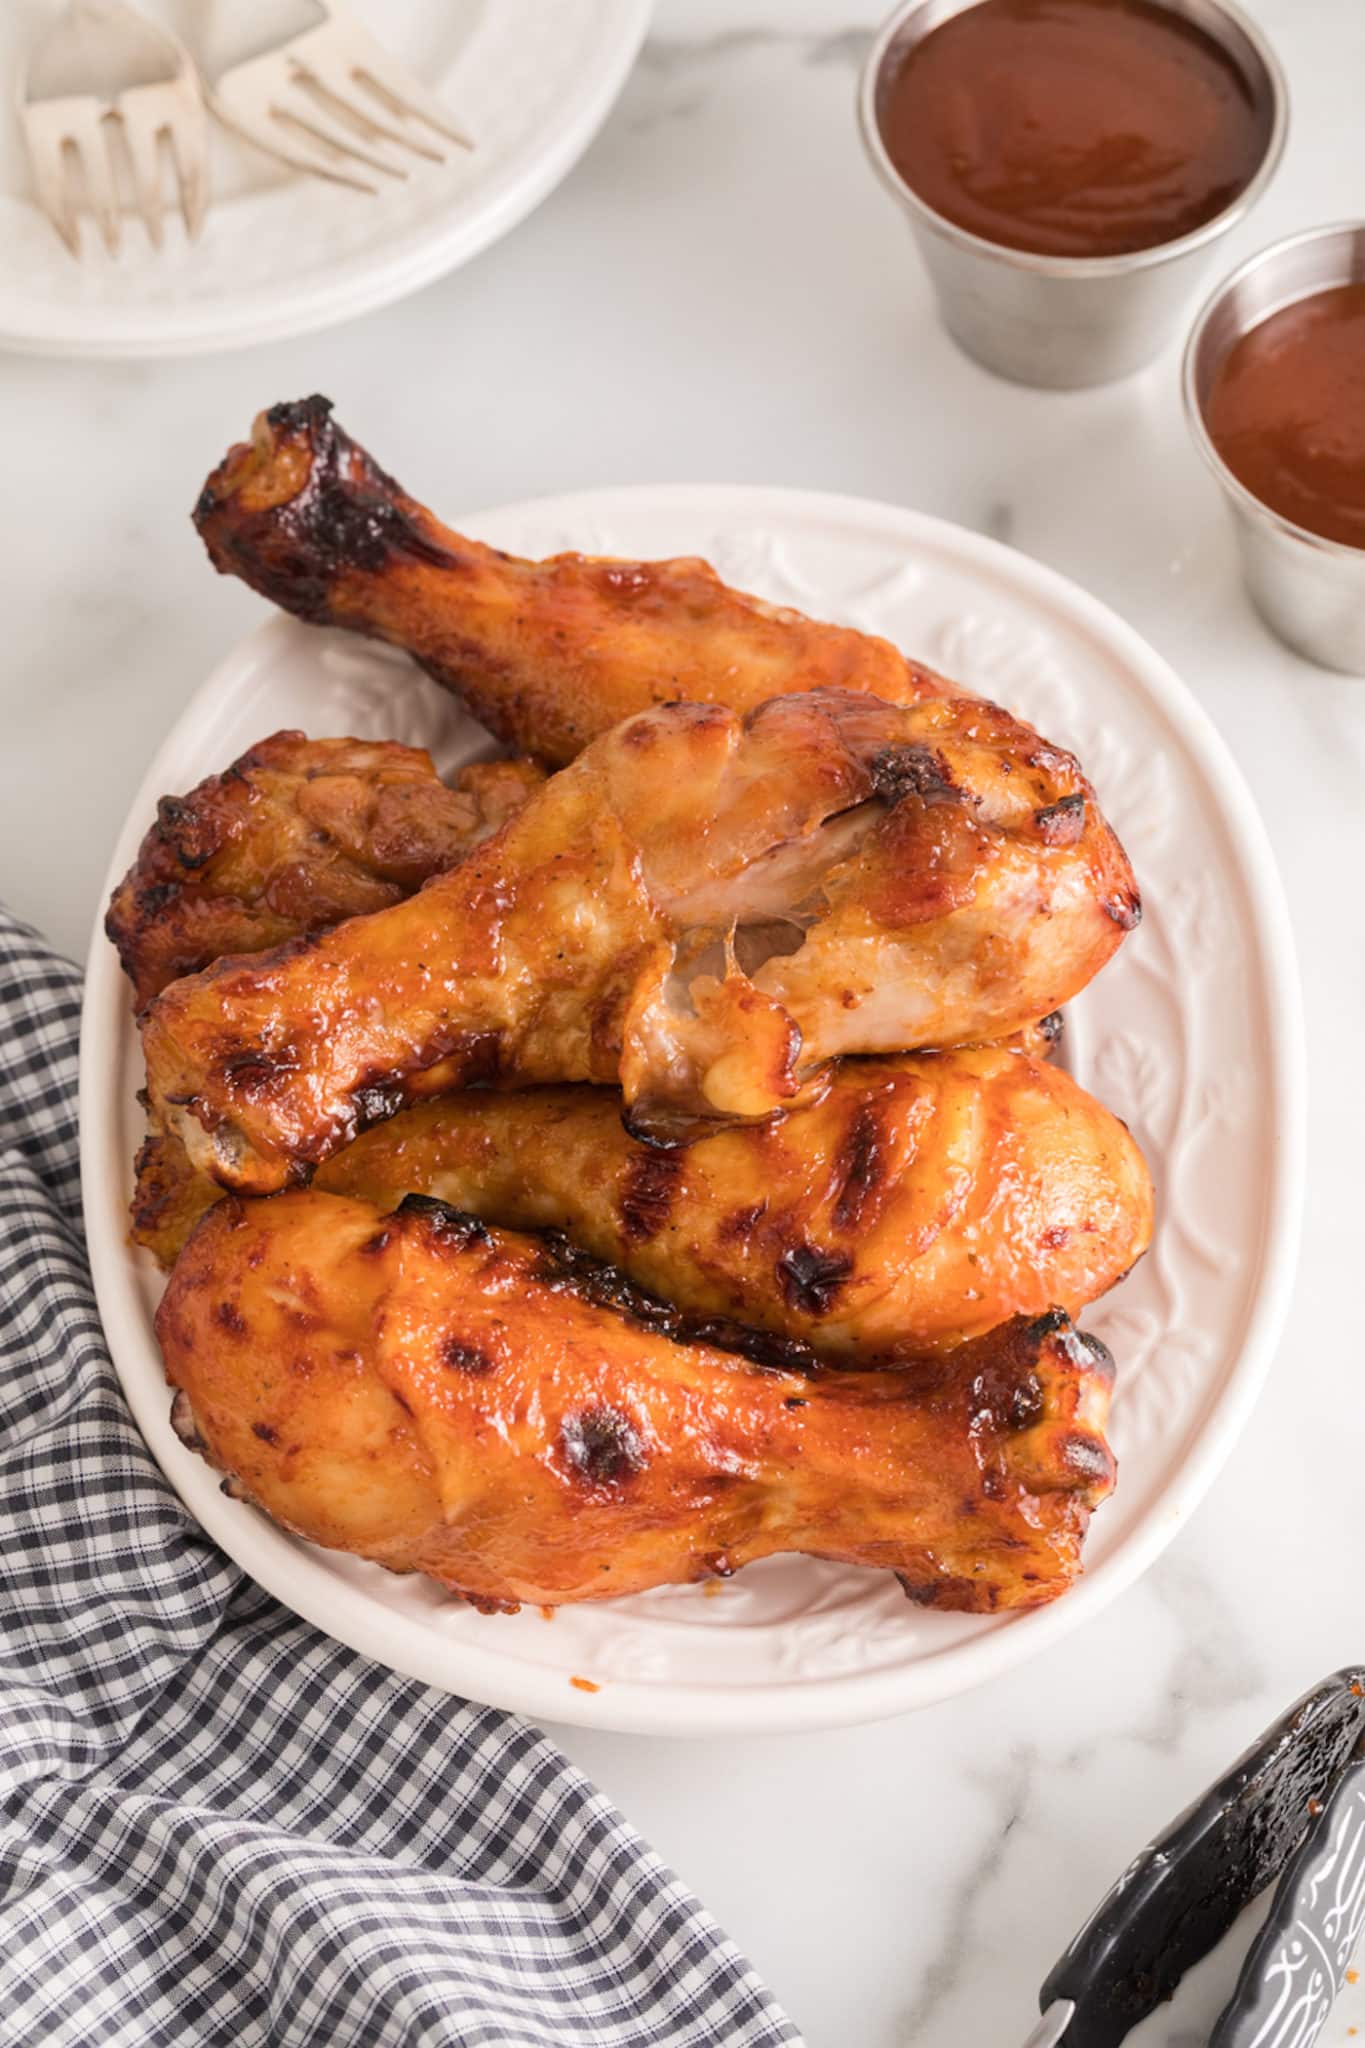 Air fryer BBQ chicken legs piled up on a white plate.